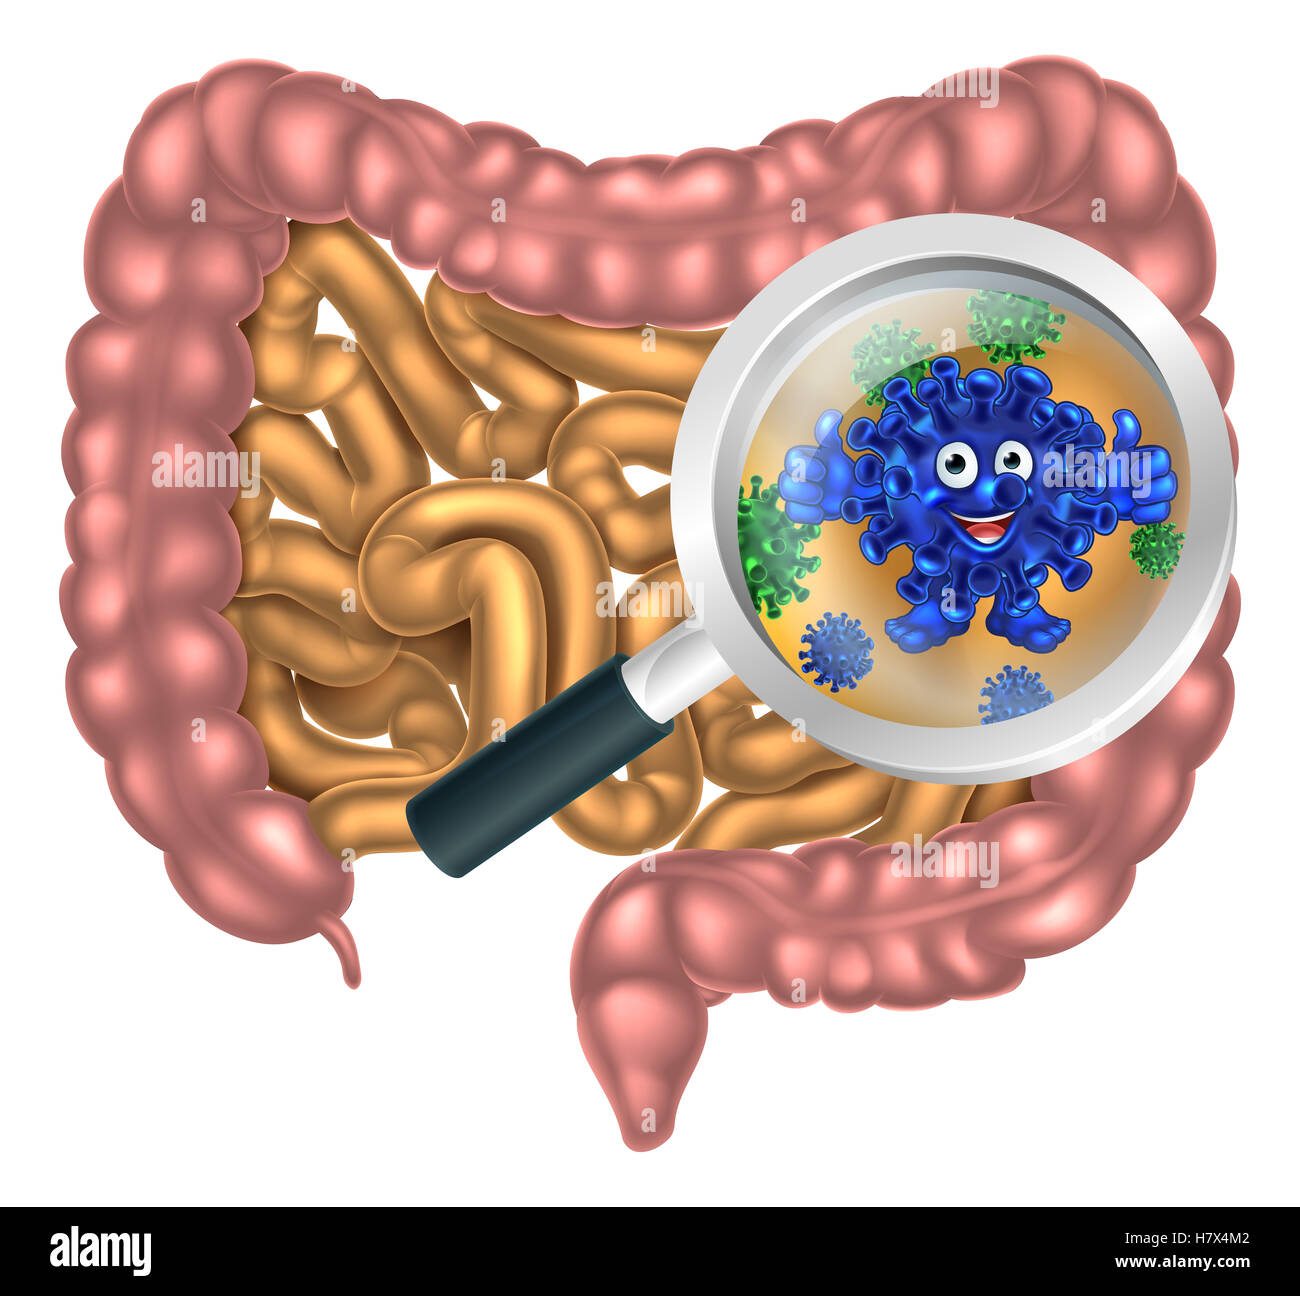 Magnifying glass focused on the human digestive system, digestive tract or alimentary  canal showing a good happy probiotic bacte Stock Photo - Alamy